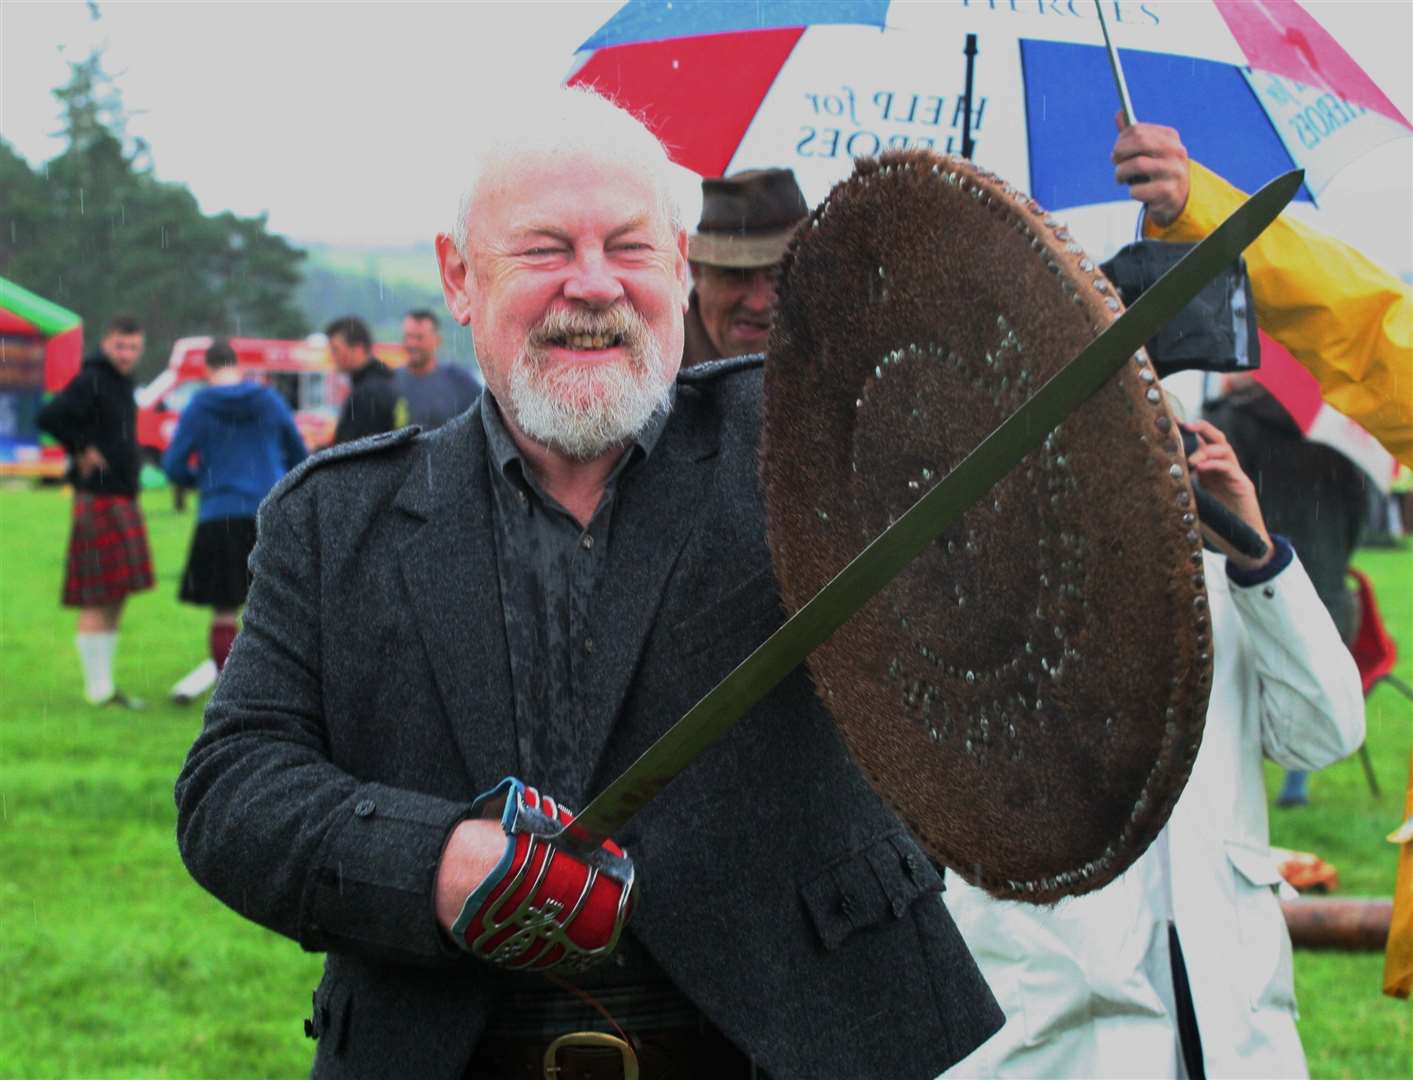 Actor Jimmy Yuill of Golspie was chieftain at the 2017 games.